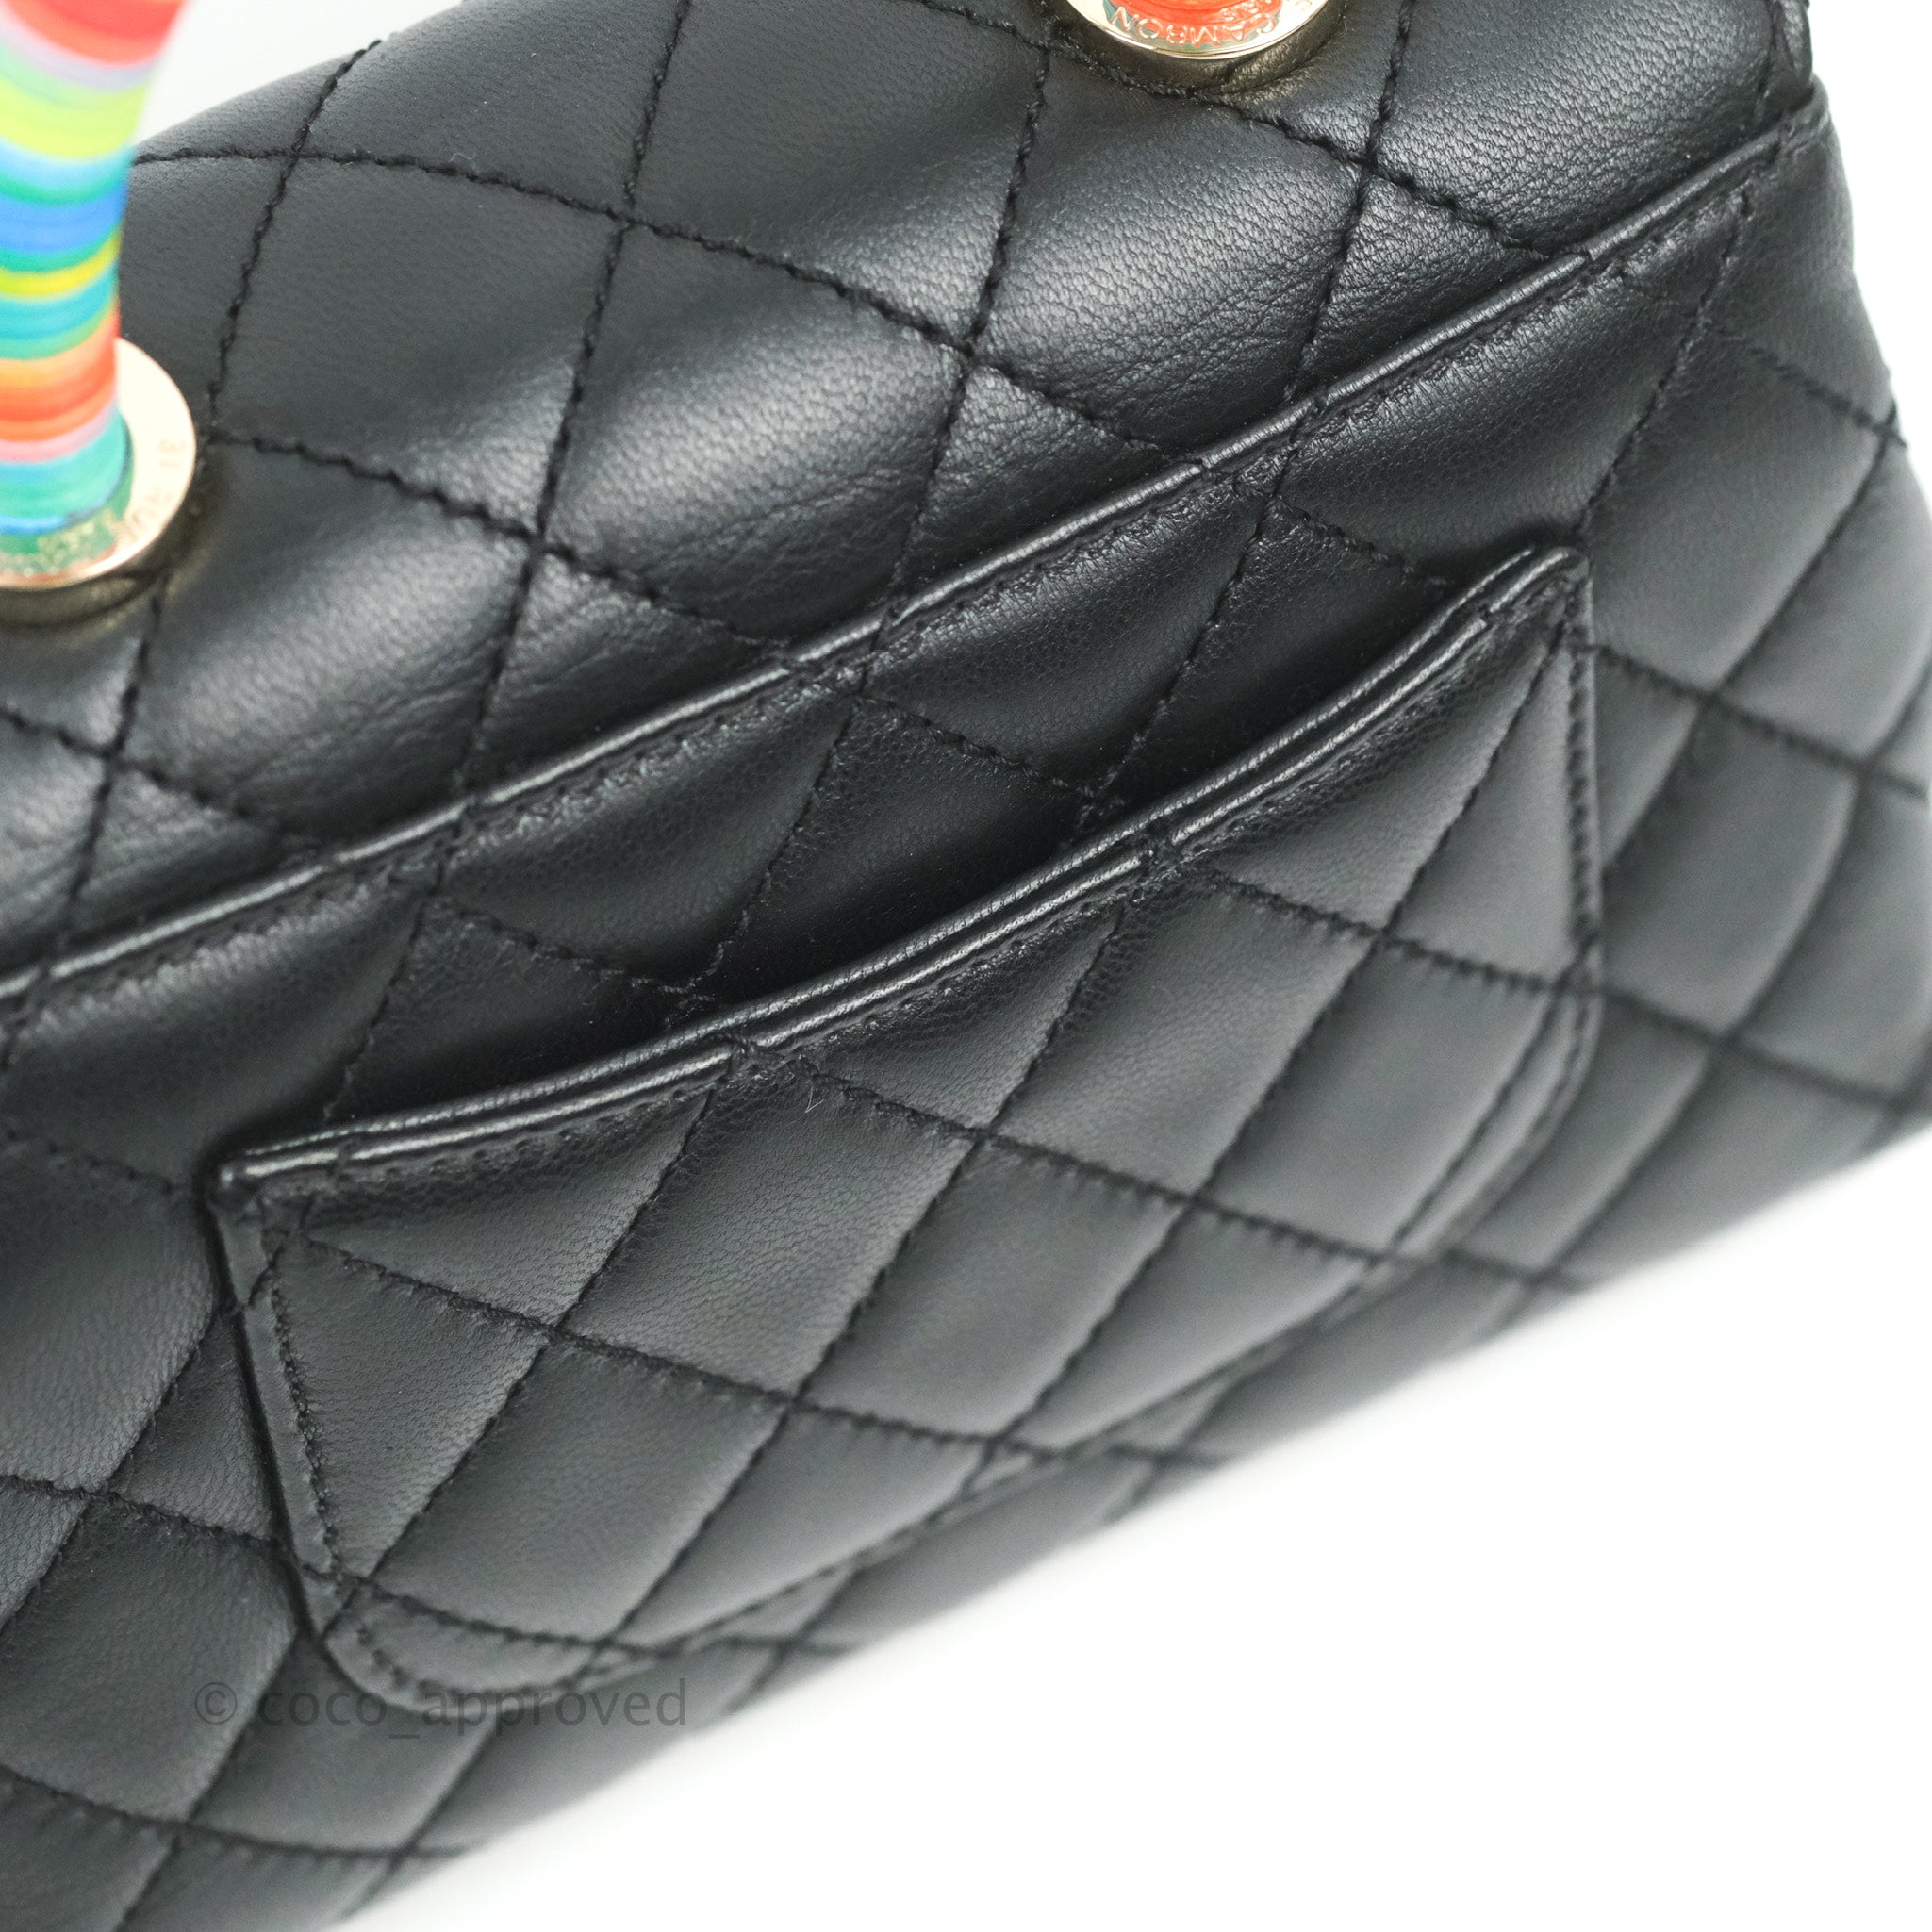 Chanel Quilted Clutch with Chain Black Lambskin Silver Hardware